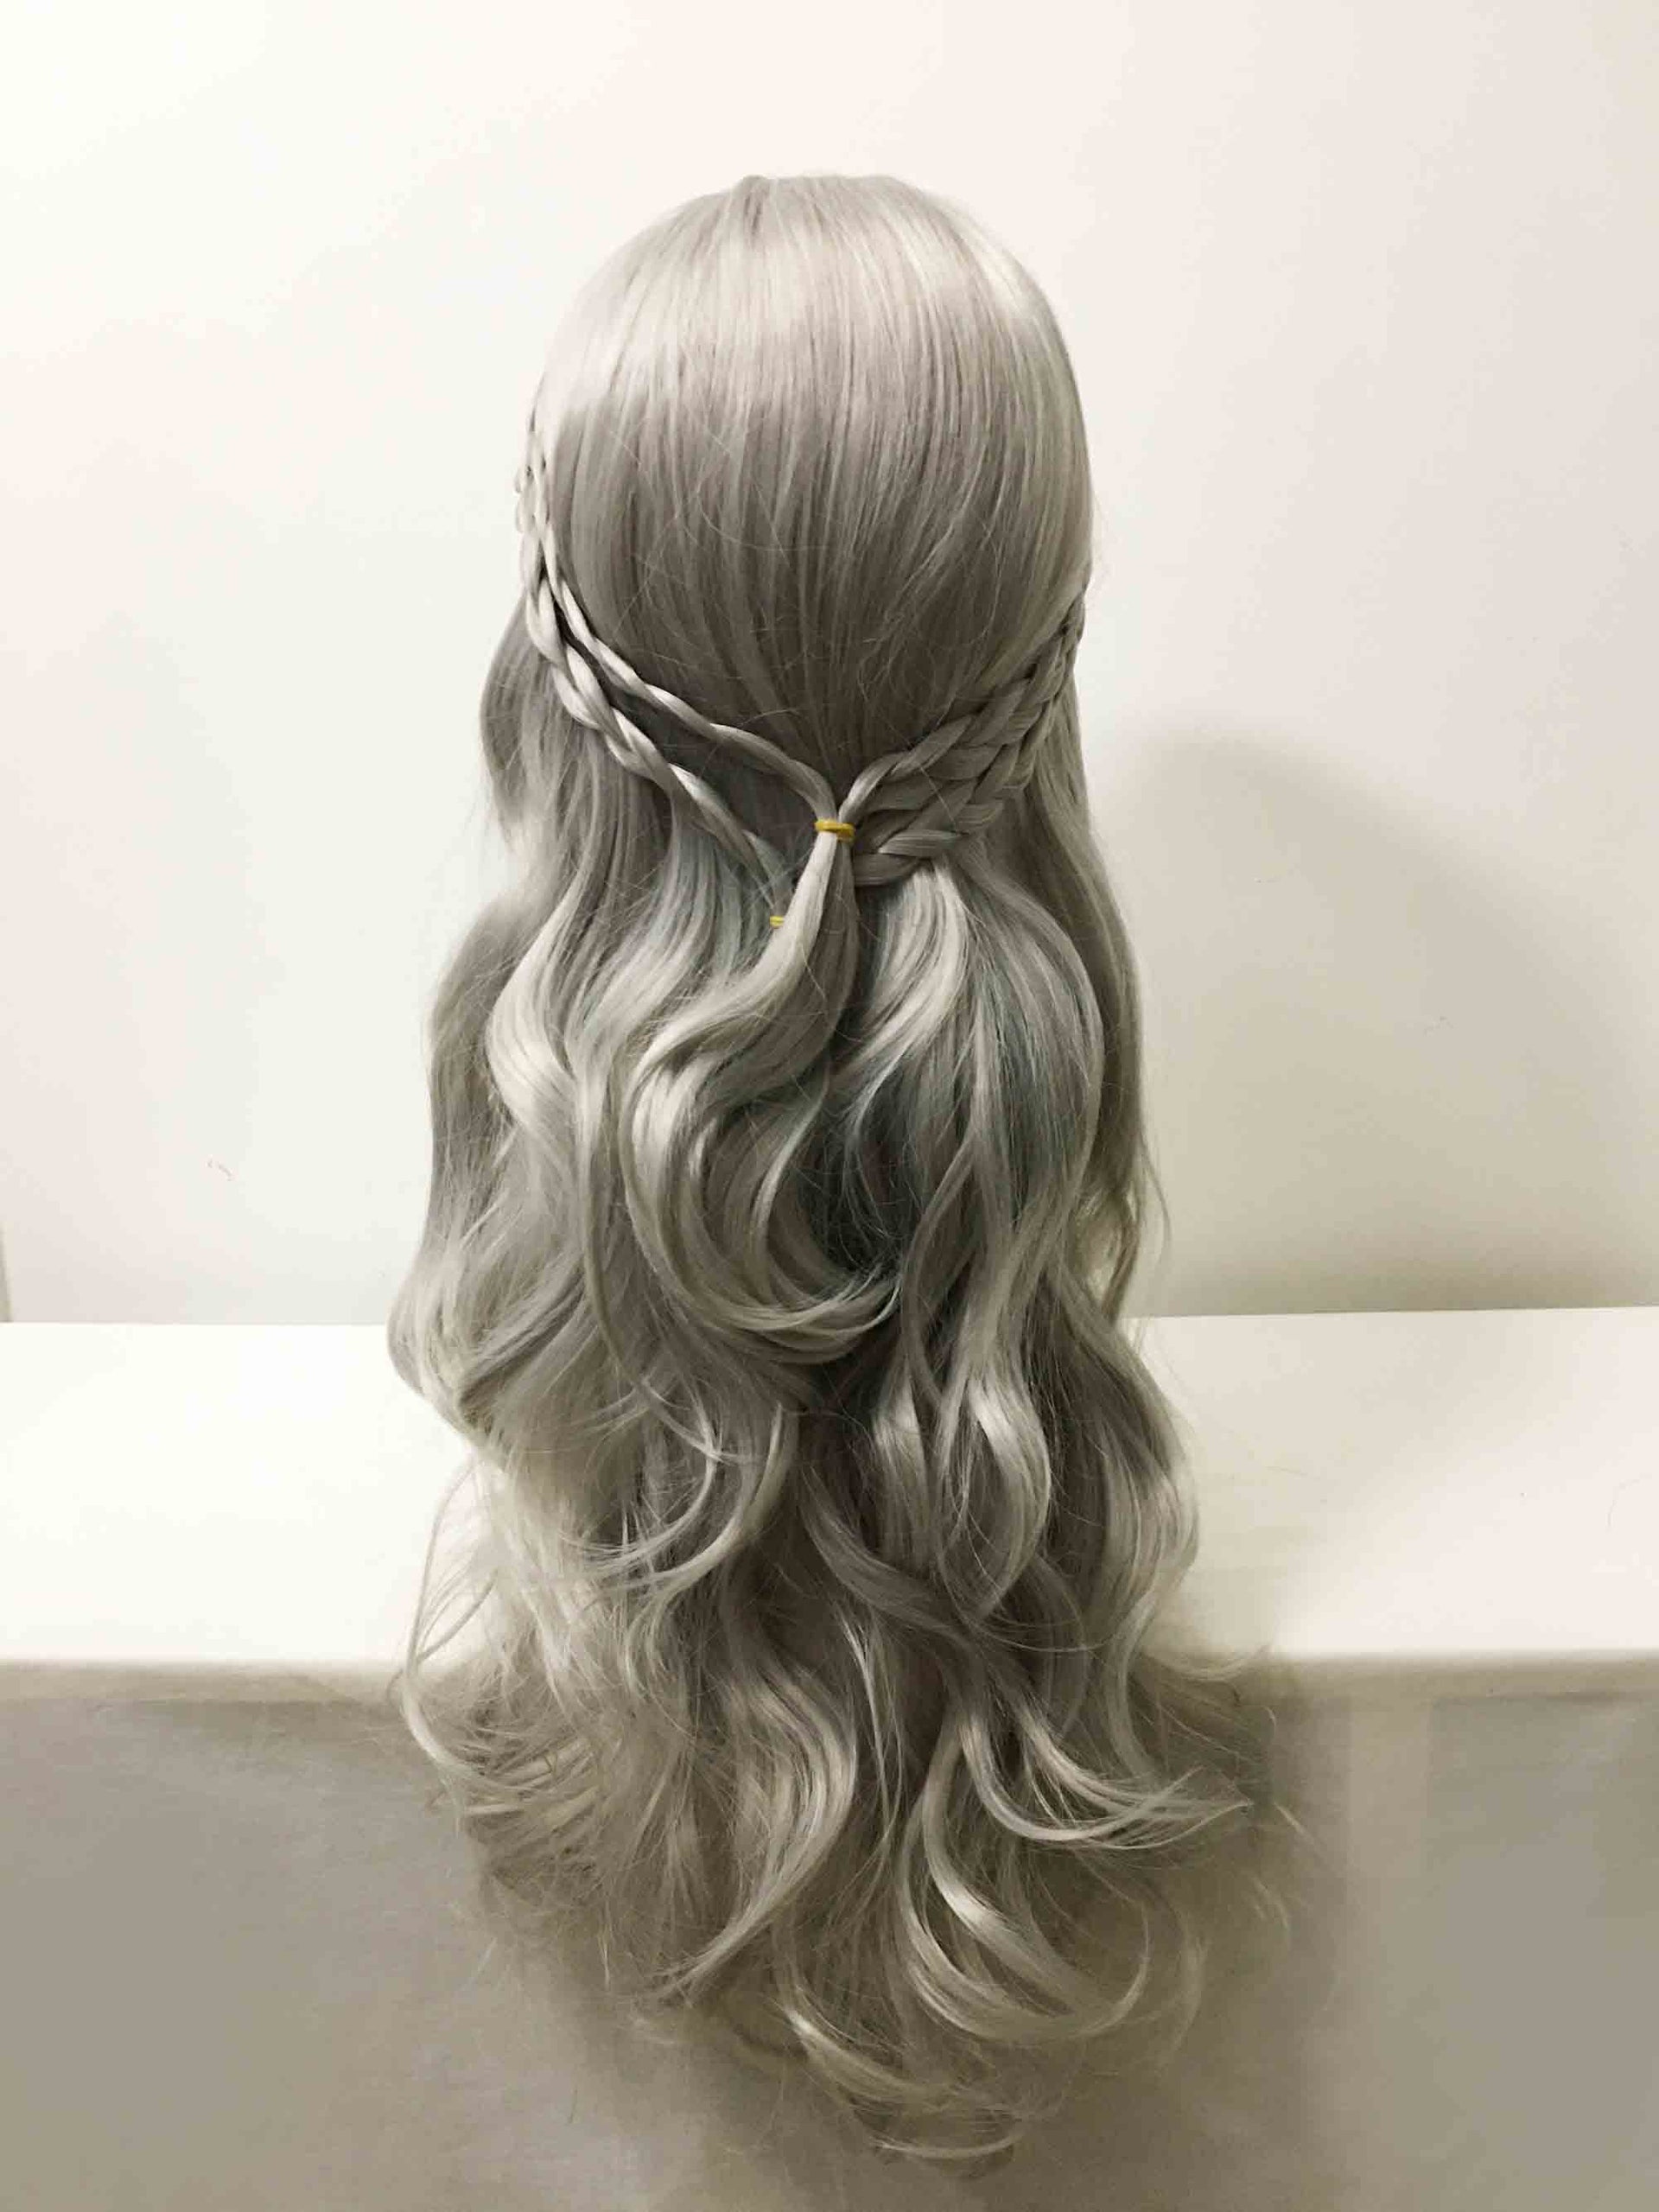 nevermindyrhead Women Gray Long Curly Princess Style Braided Middle Part Cosplay Wig